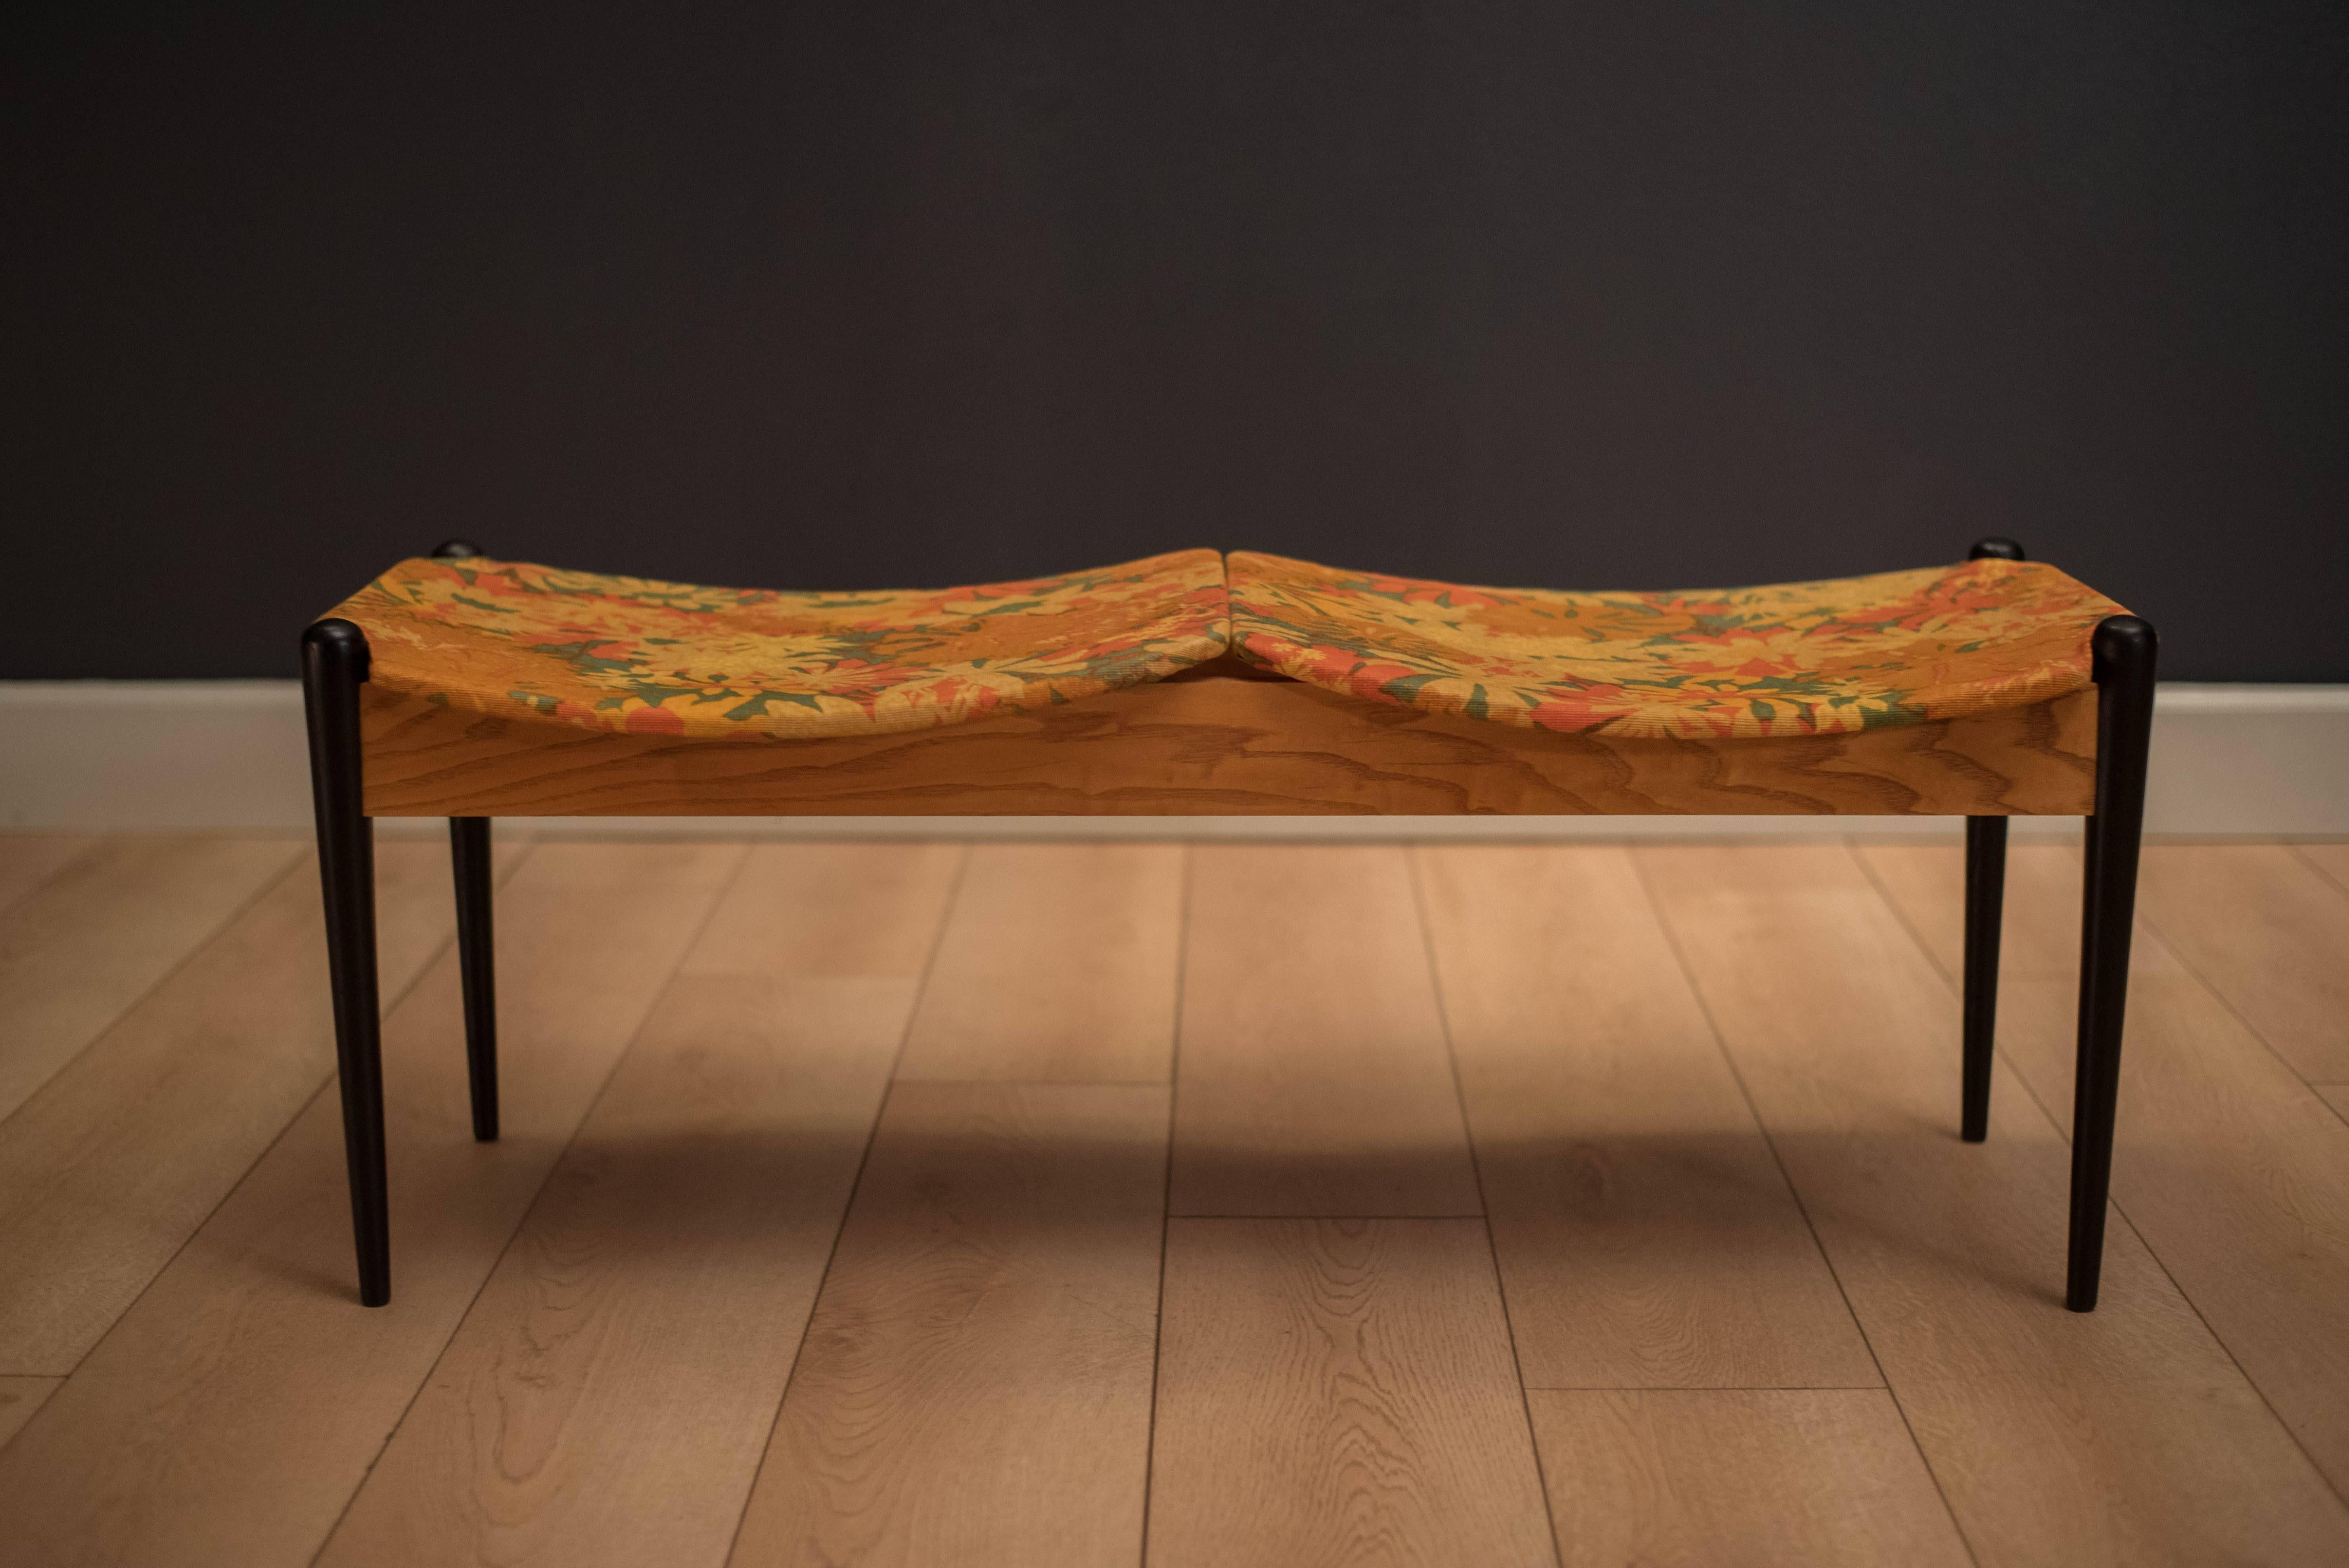 Classic Mid-Century Modern designed bench by Arthur Umanoff for Washington Wood Prod. Inc. This versatile piece features double seating with the original fabric and can function as an entryway or bedside bench.